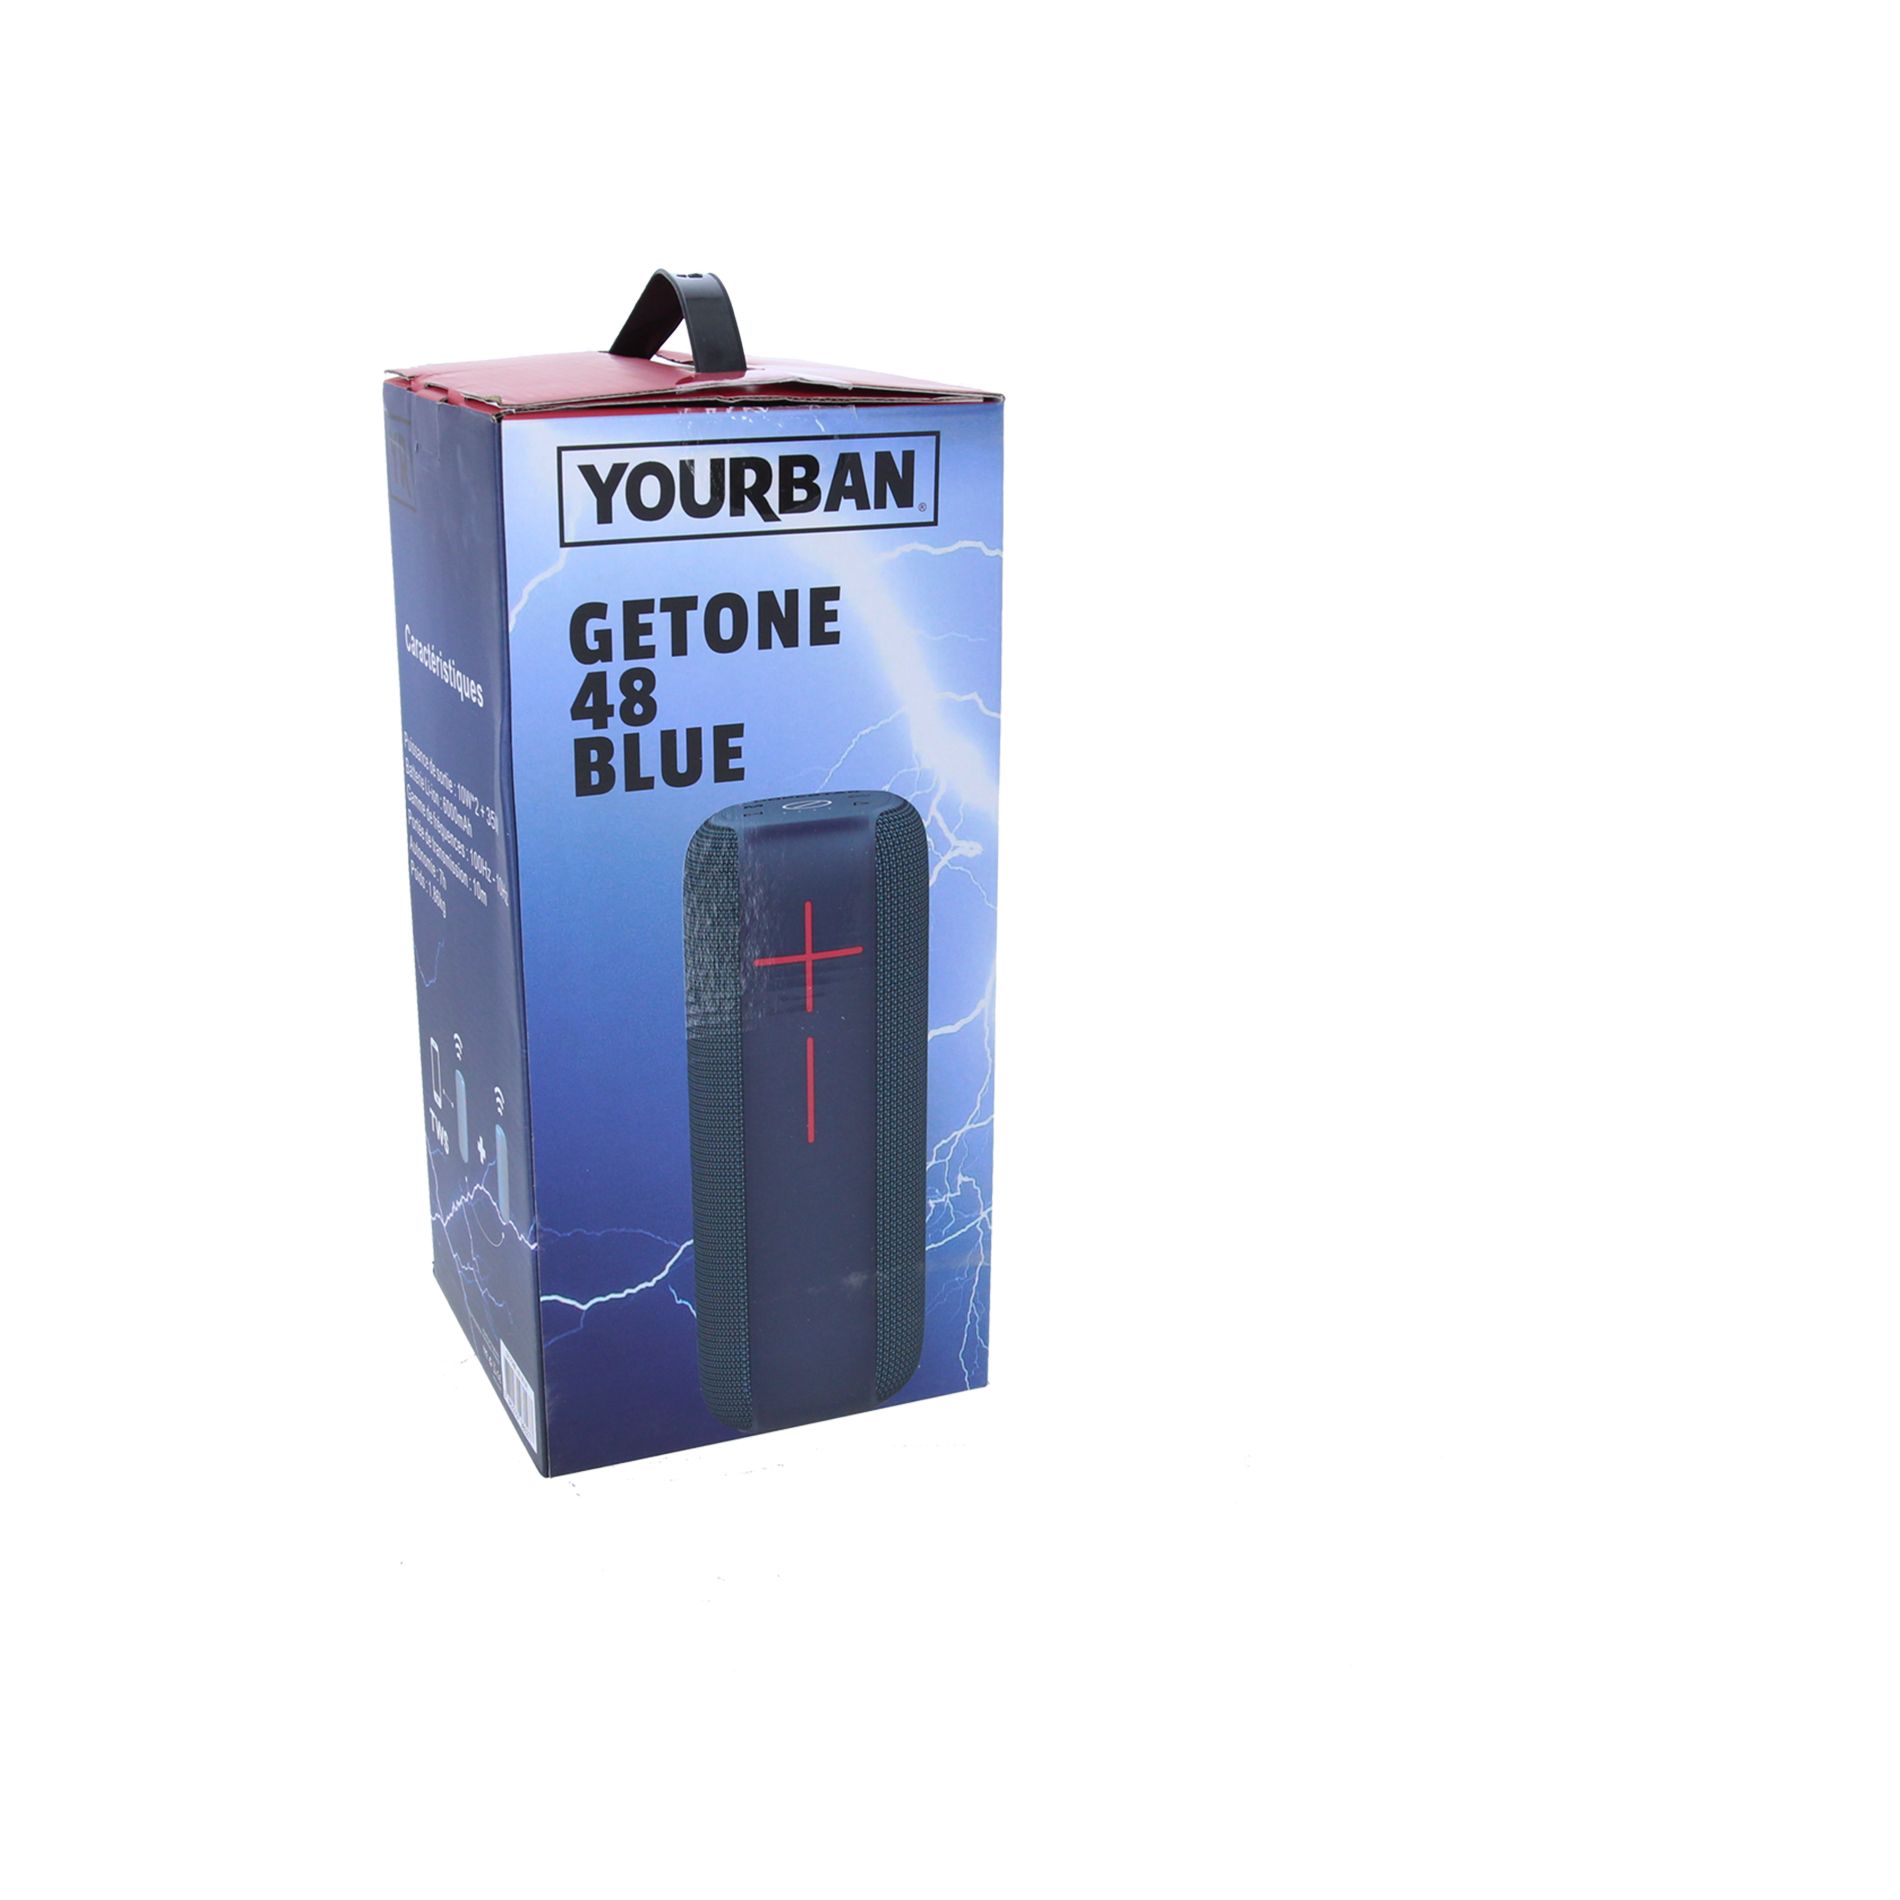 Yourban Getone 48 Blue - Mobiele PA- systeem - Variation 5